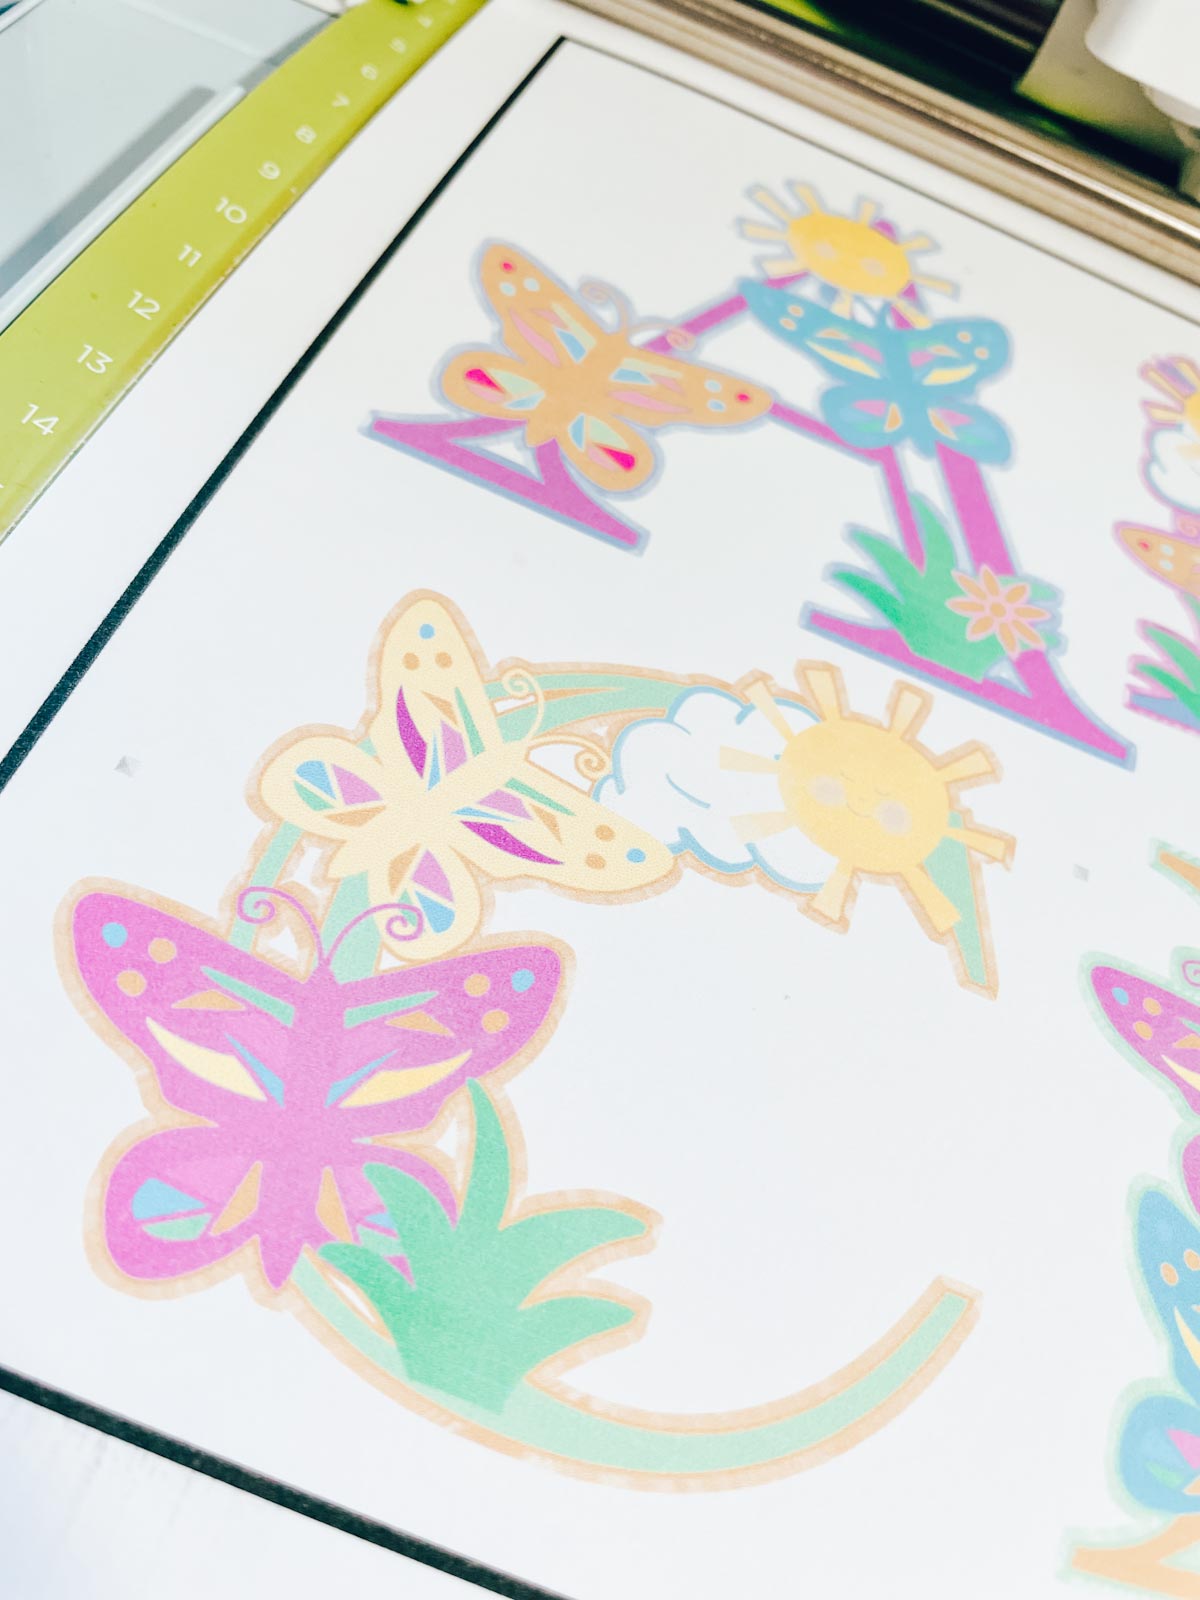 How to use Cricut print and cut